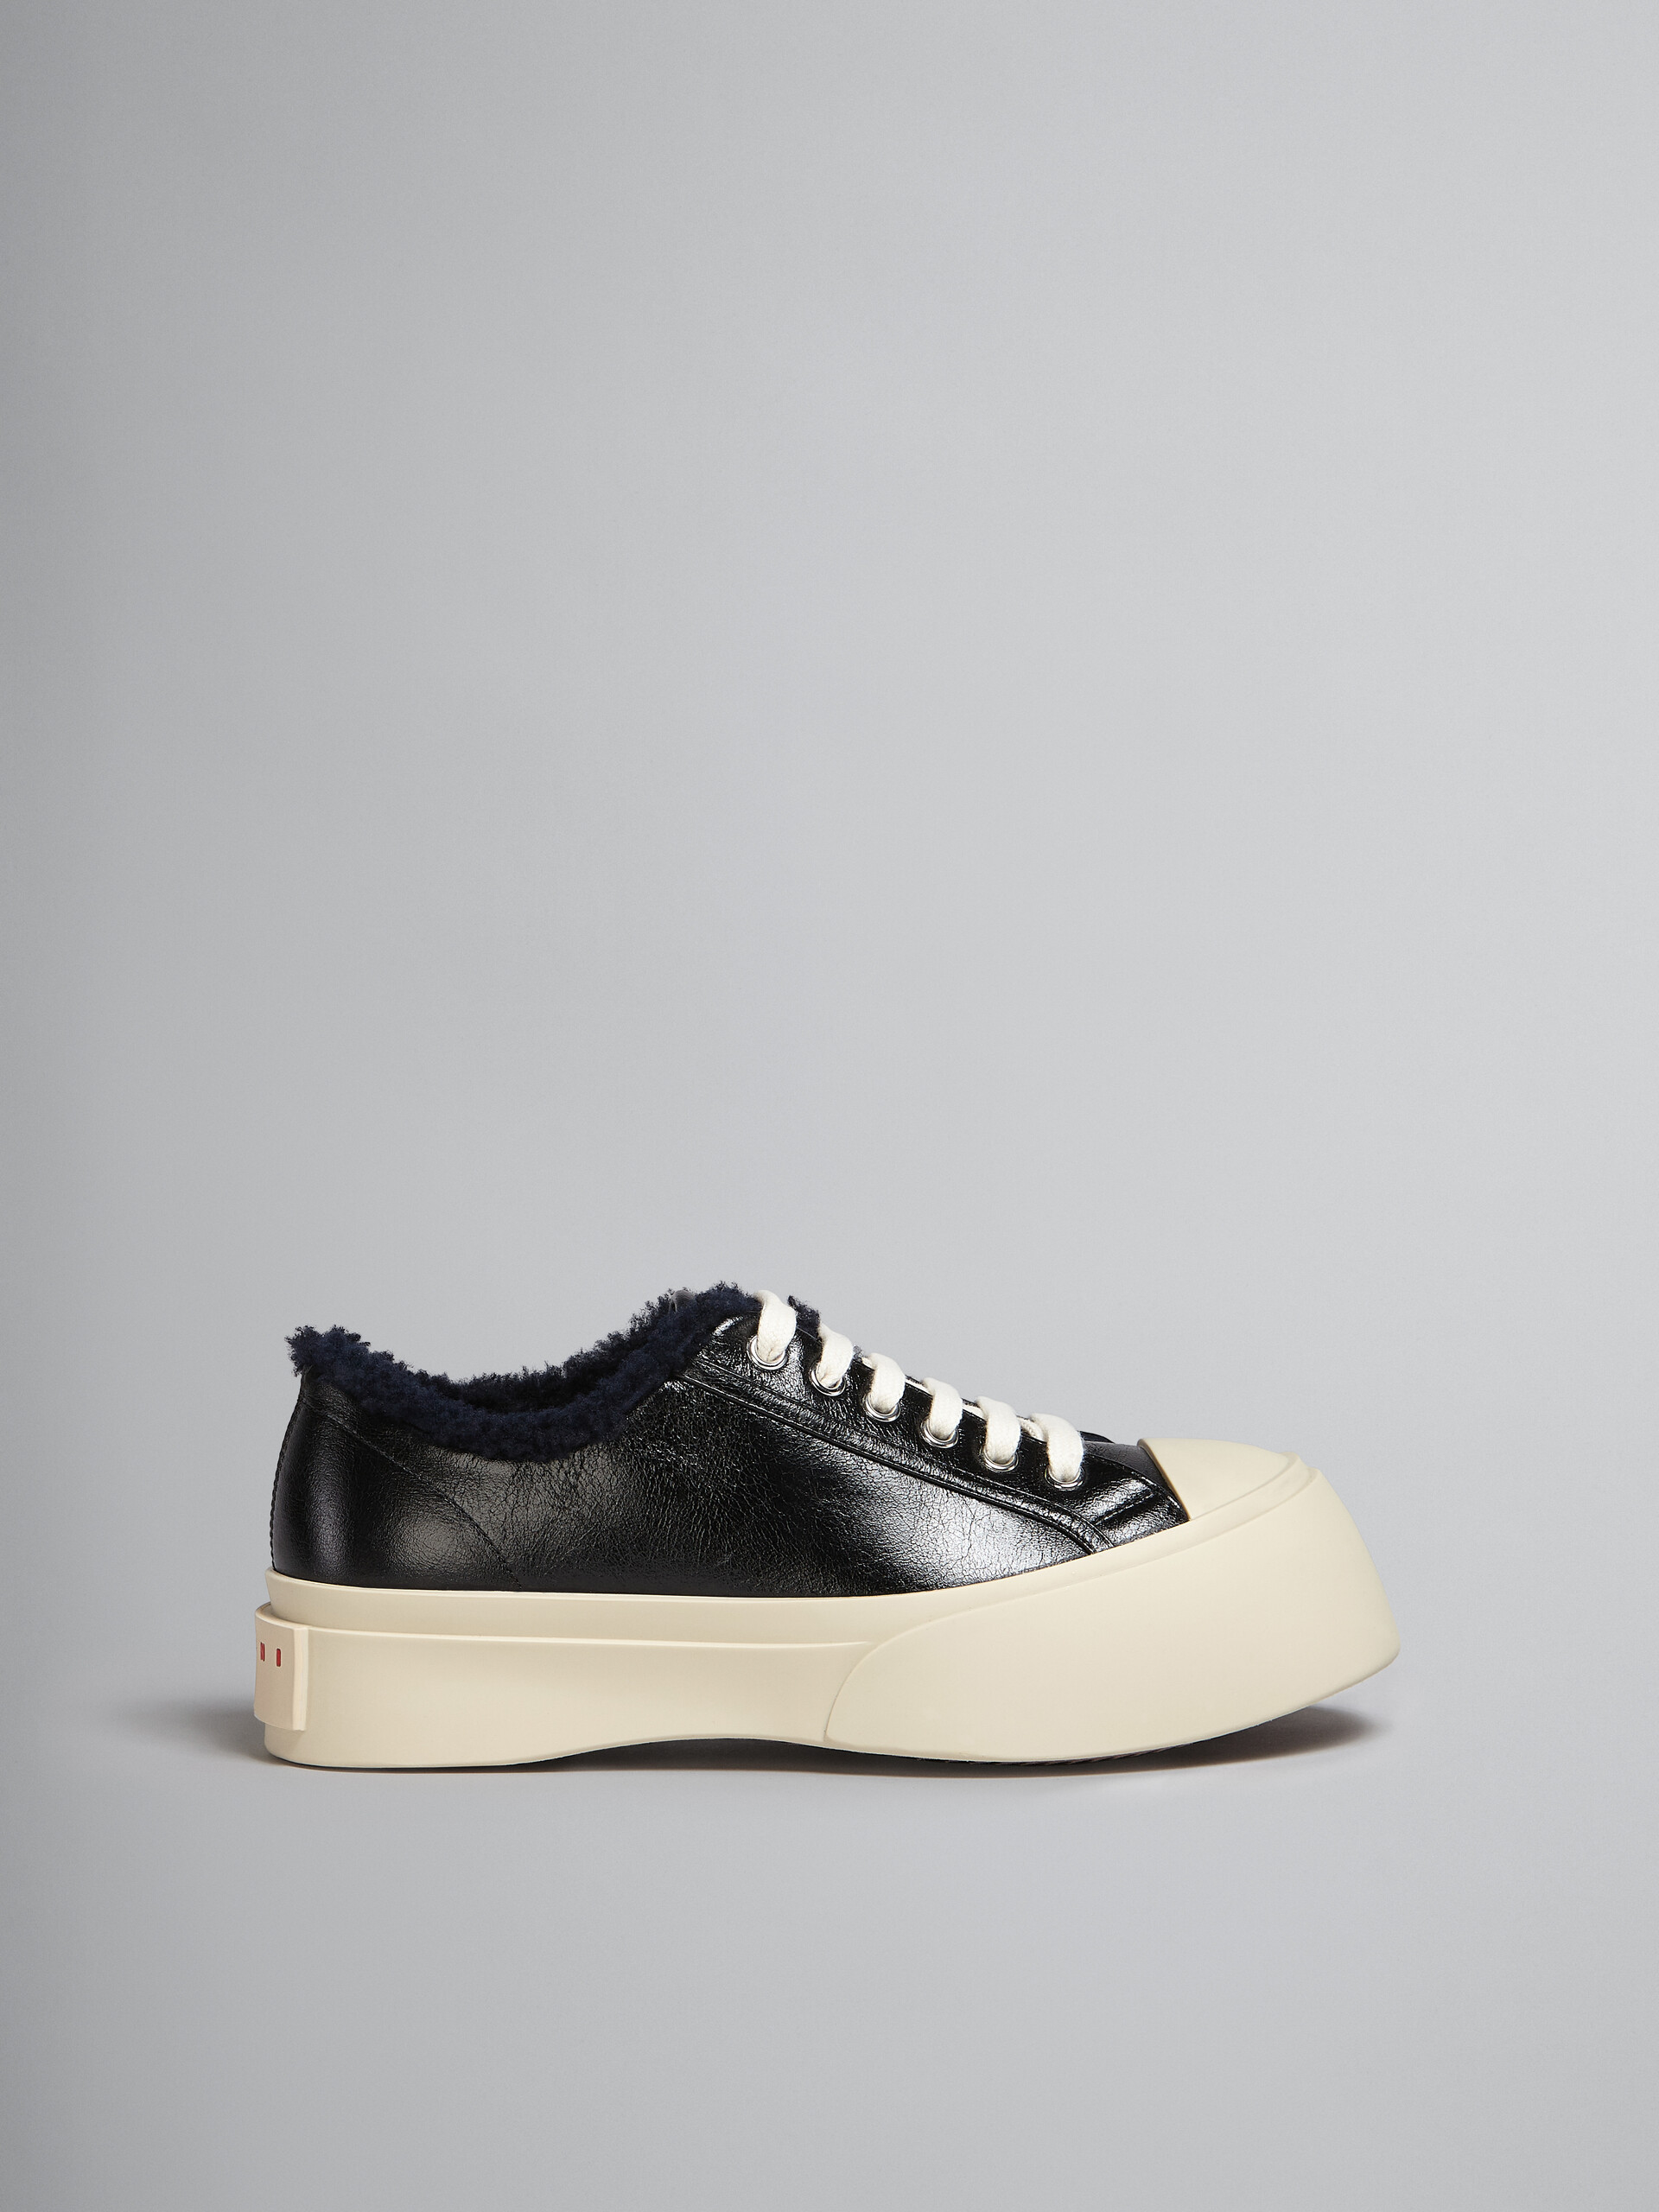 Black leather and merinos lace-up sneaker - Sneakers - Image 1